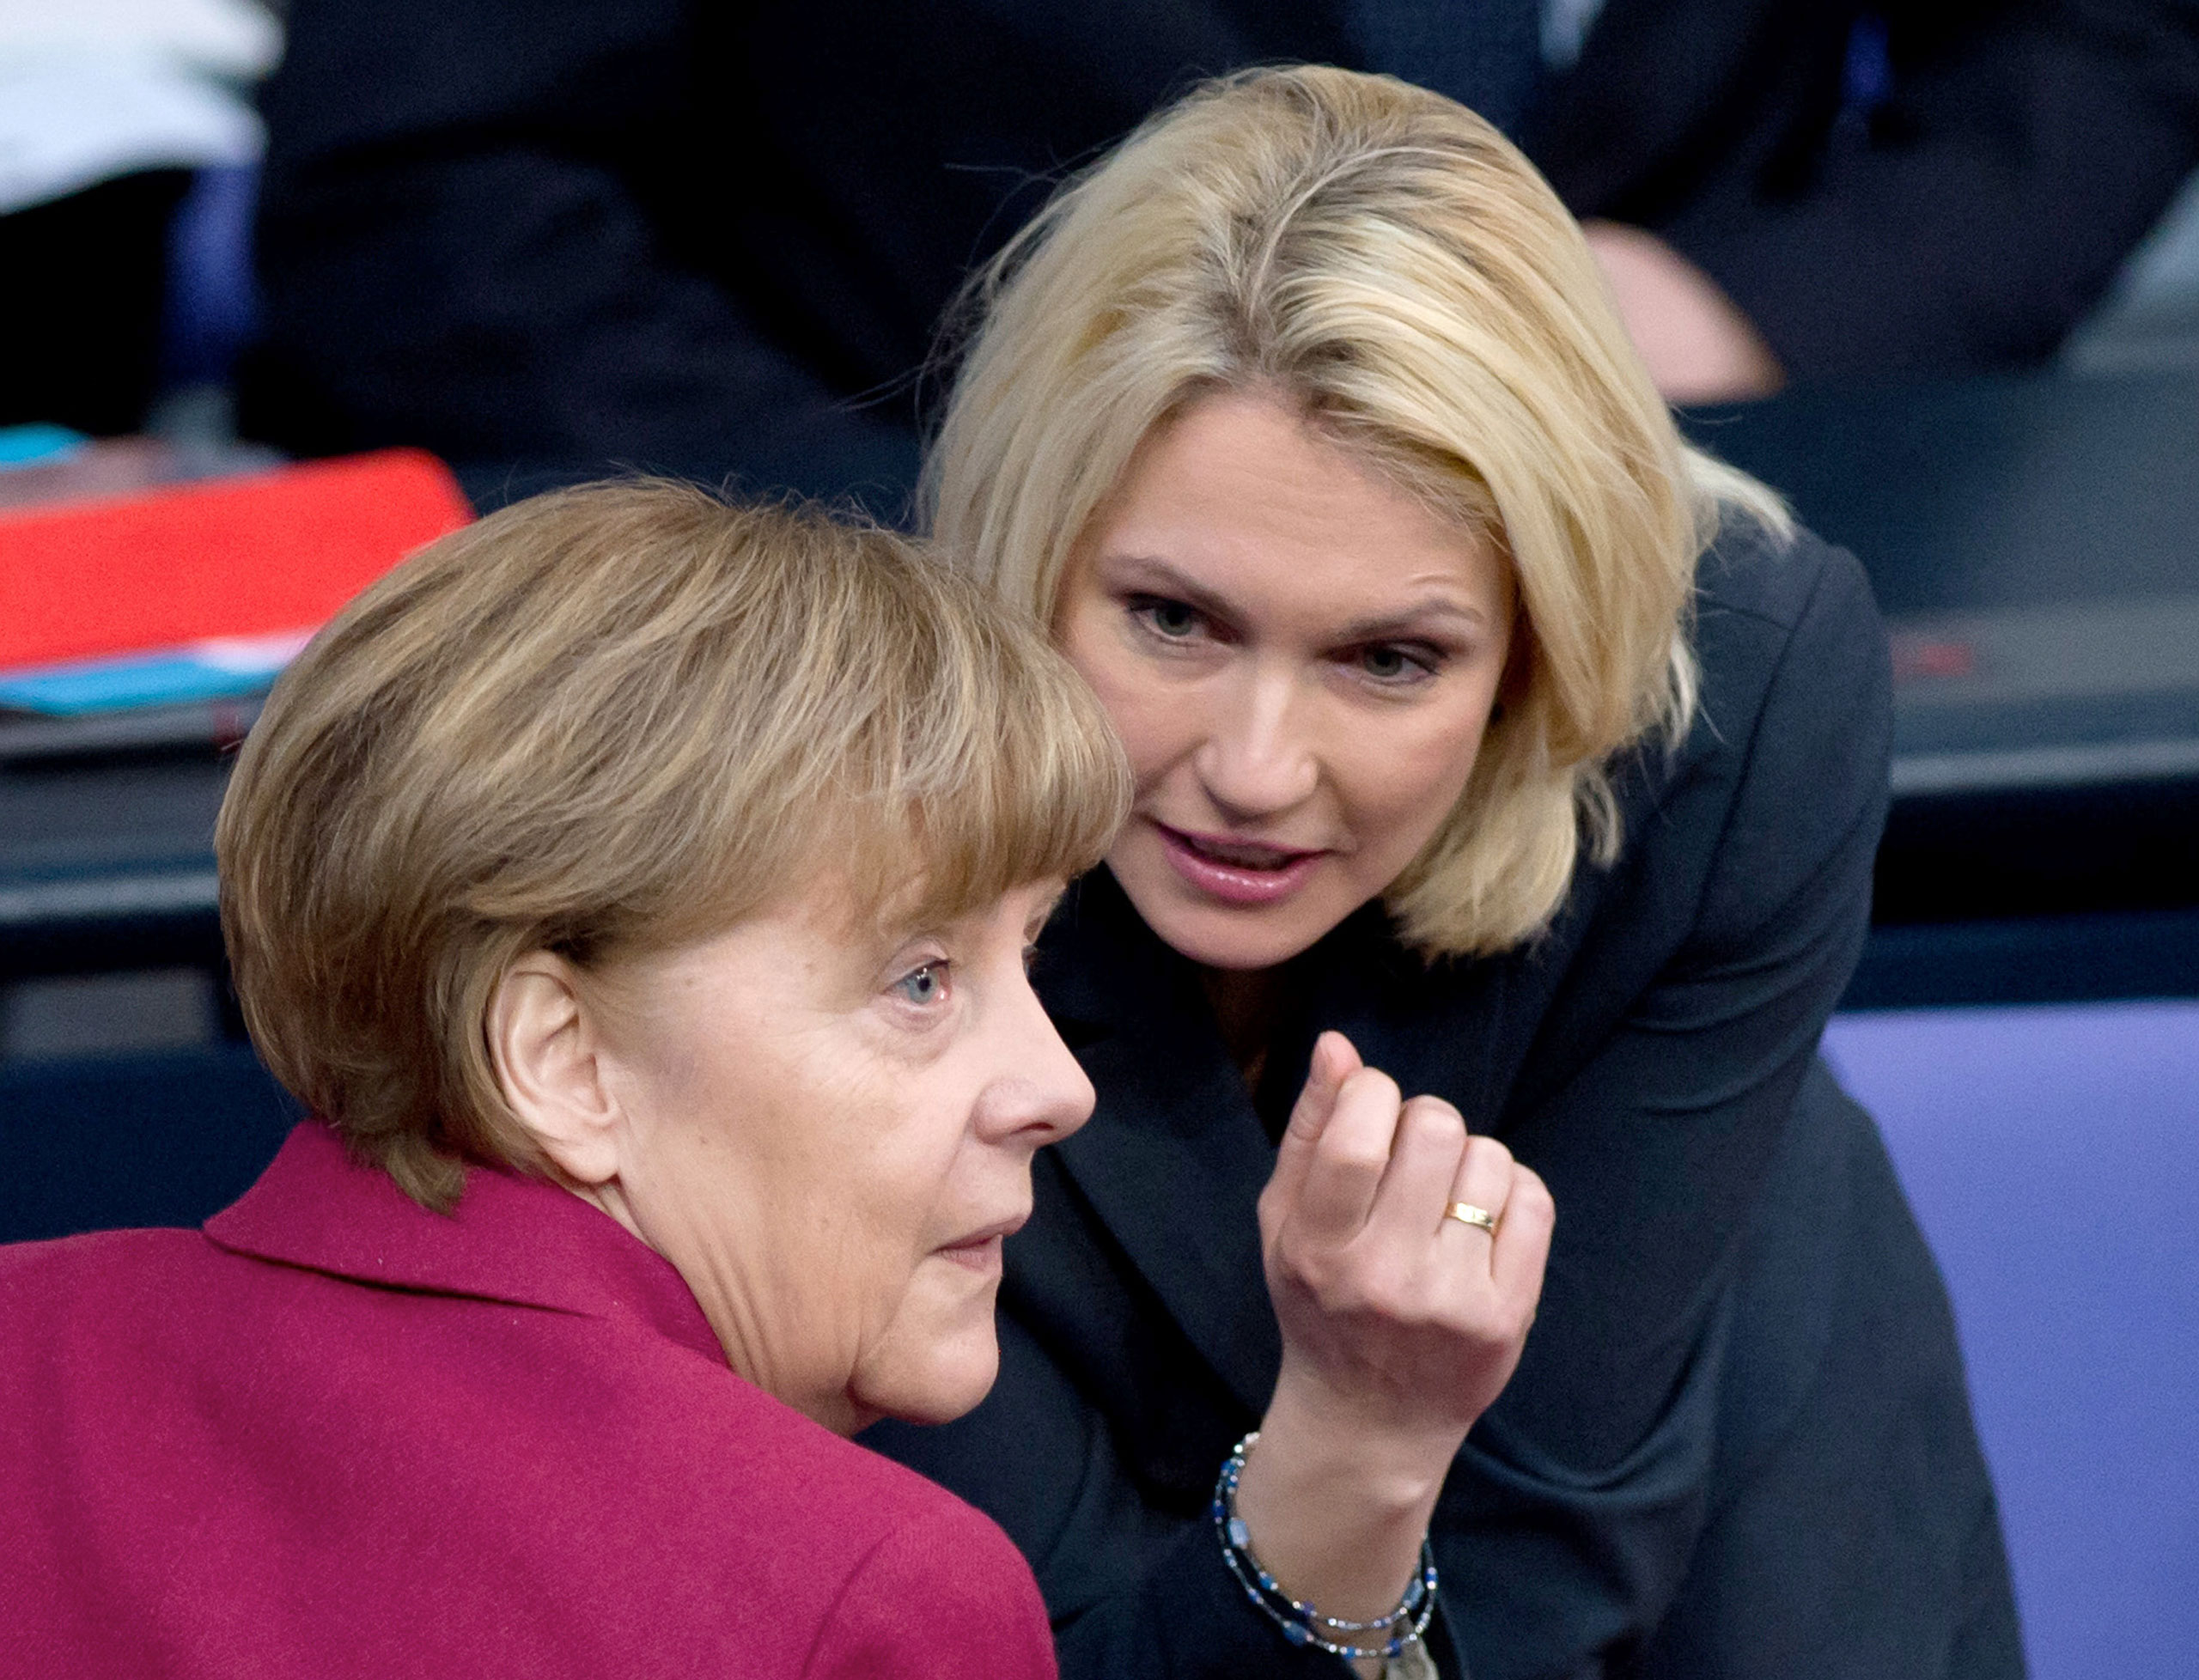 German chancellor Angela Merkel, left, and German Minister of Family Affairs Manuela Schwesig talk during a session of parliament in Berlin, March 6, 2015. (Soeren Stache—EPA)